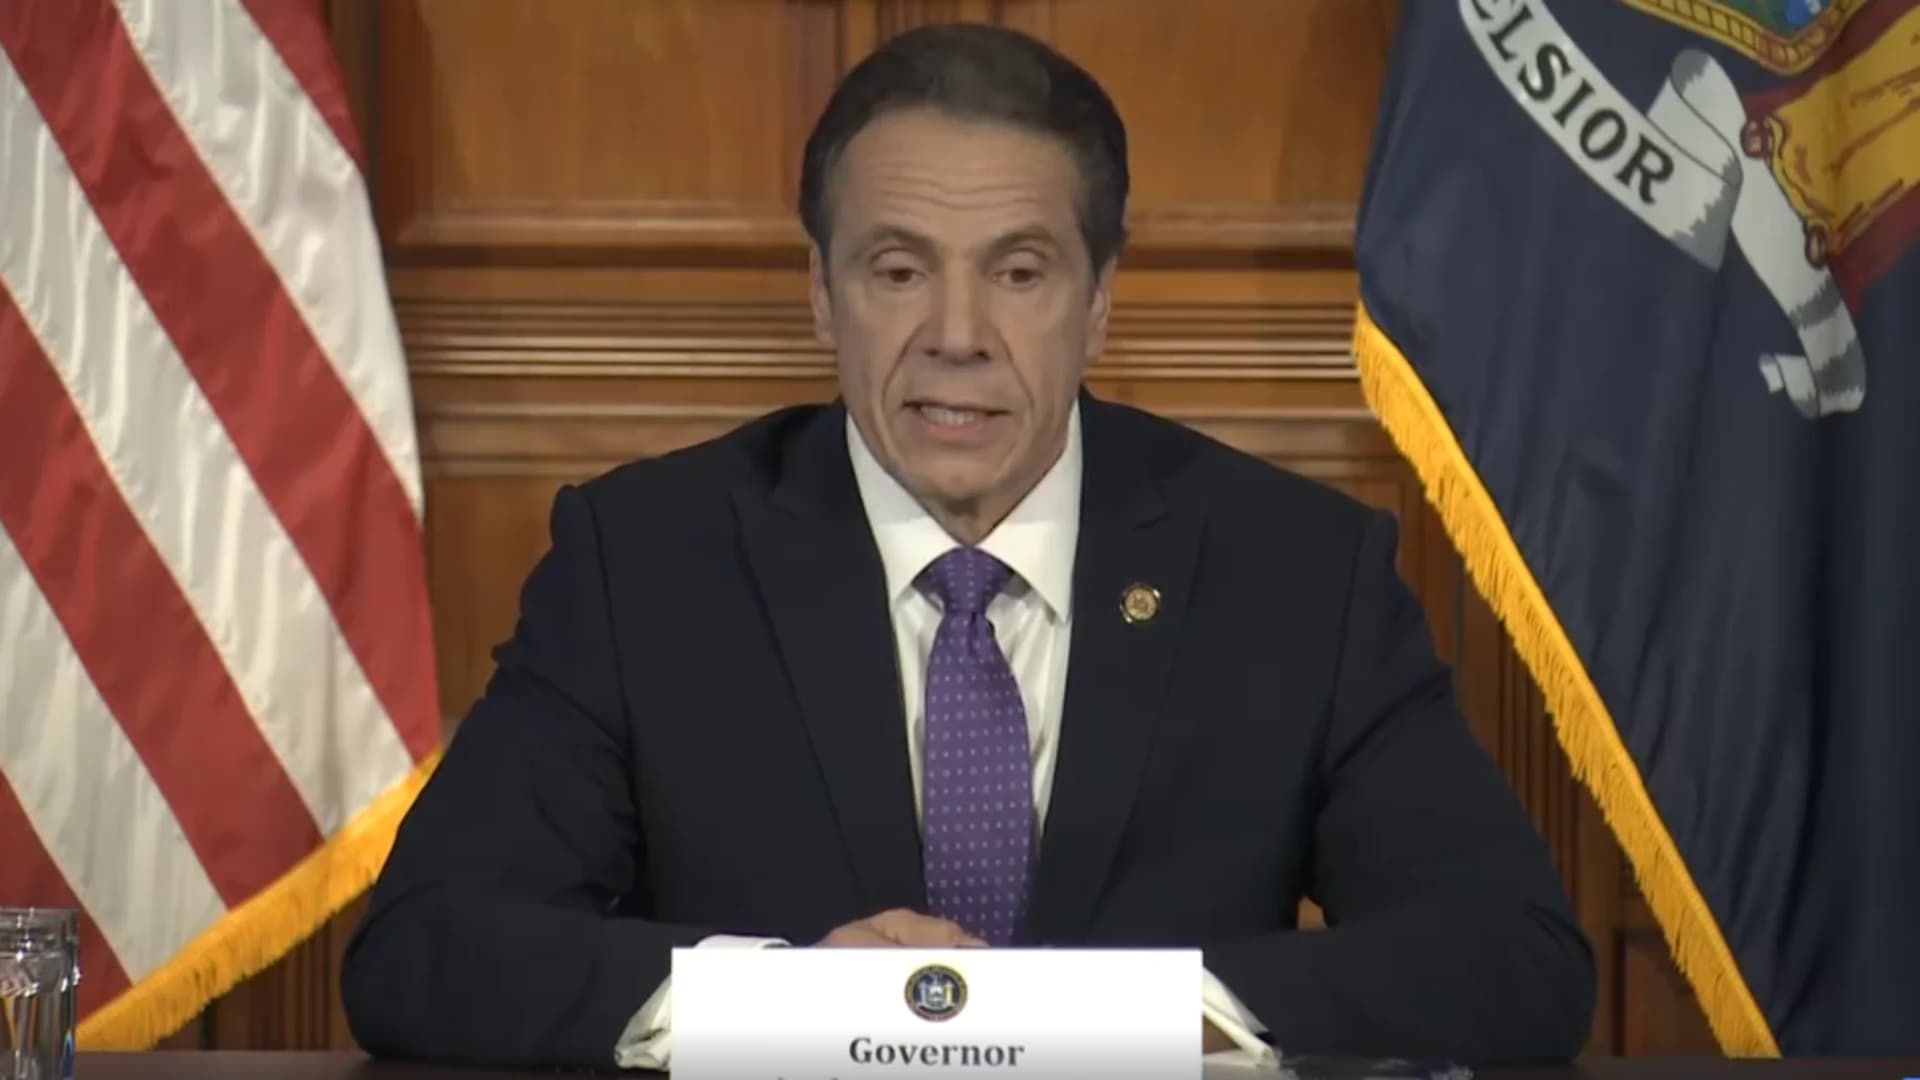 Gov. Cuomo announces preliminary data from antibody study showing 13.9% infection rate